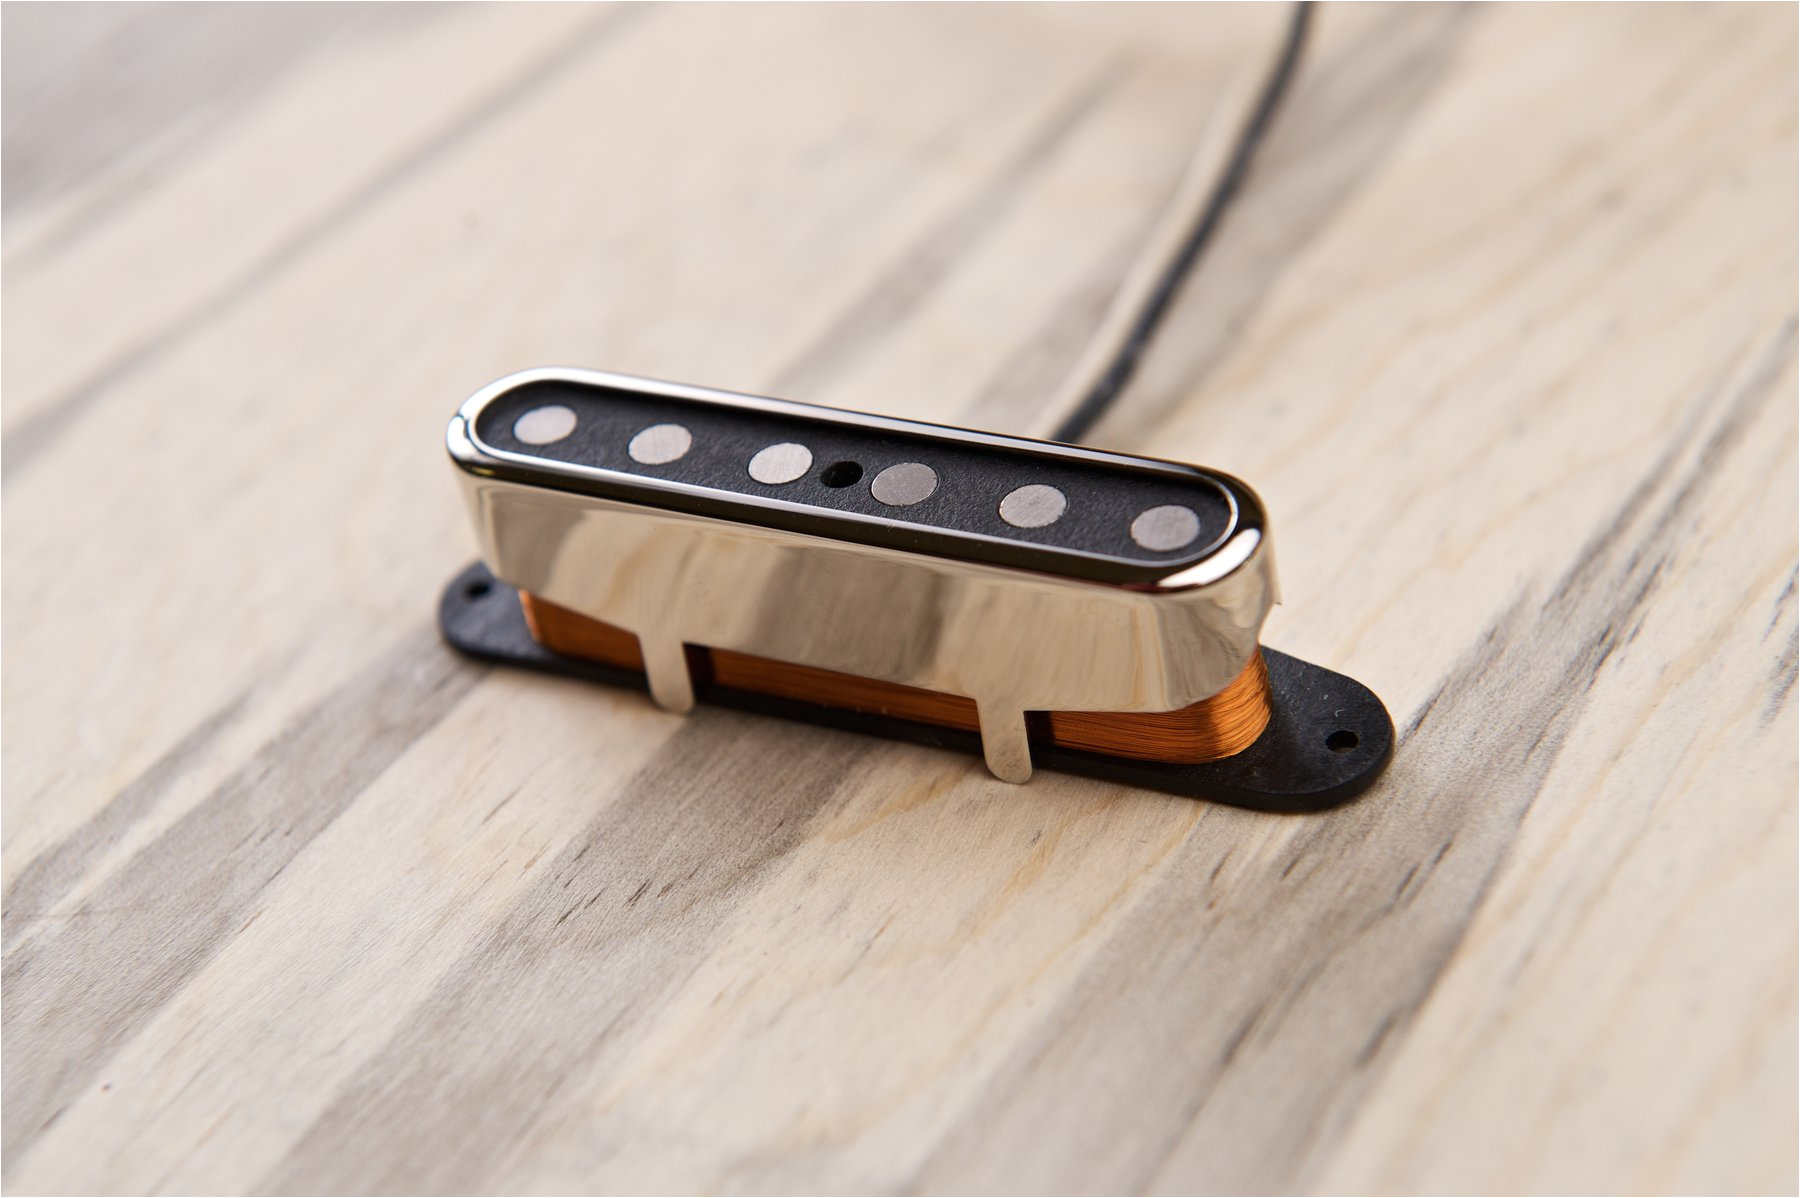 the tele s neck pickup draws inspiration from strat neck pickups and expands the sonic spectrum of a traditional tele style guitar without having to